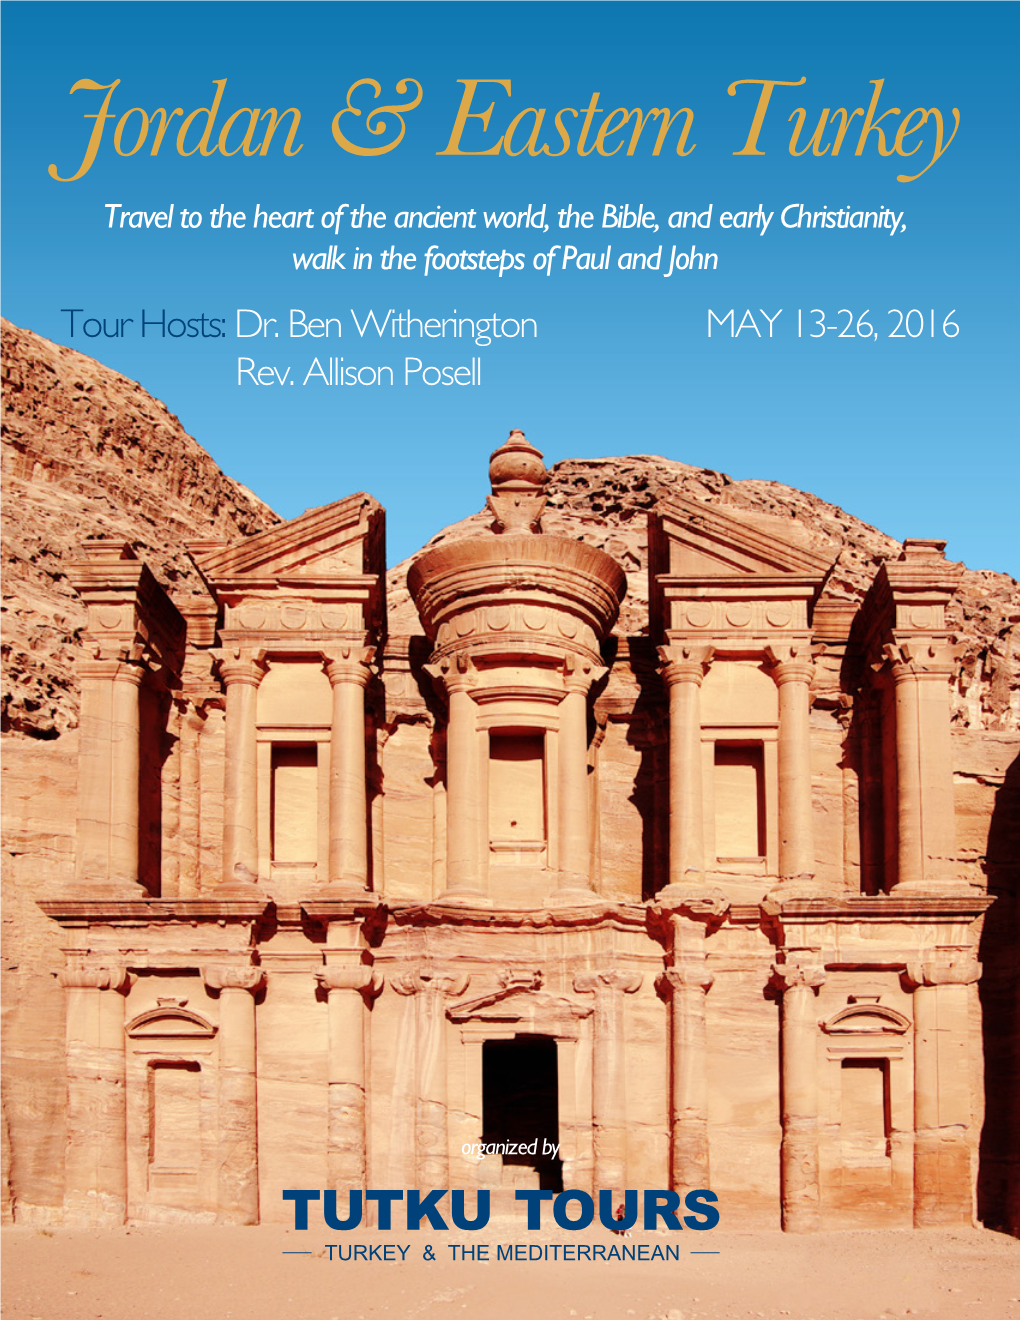 MAY 13-26, 2016 Tour Hosts: Dr. Ben Witherington Rev. Allison Posell